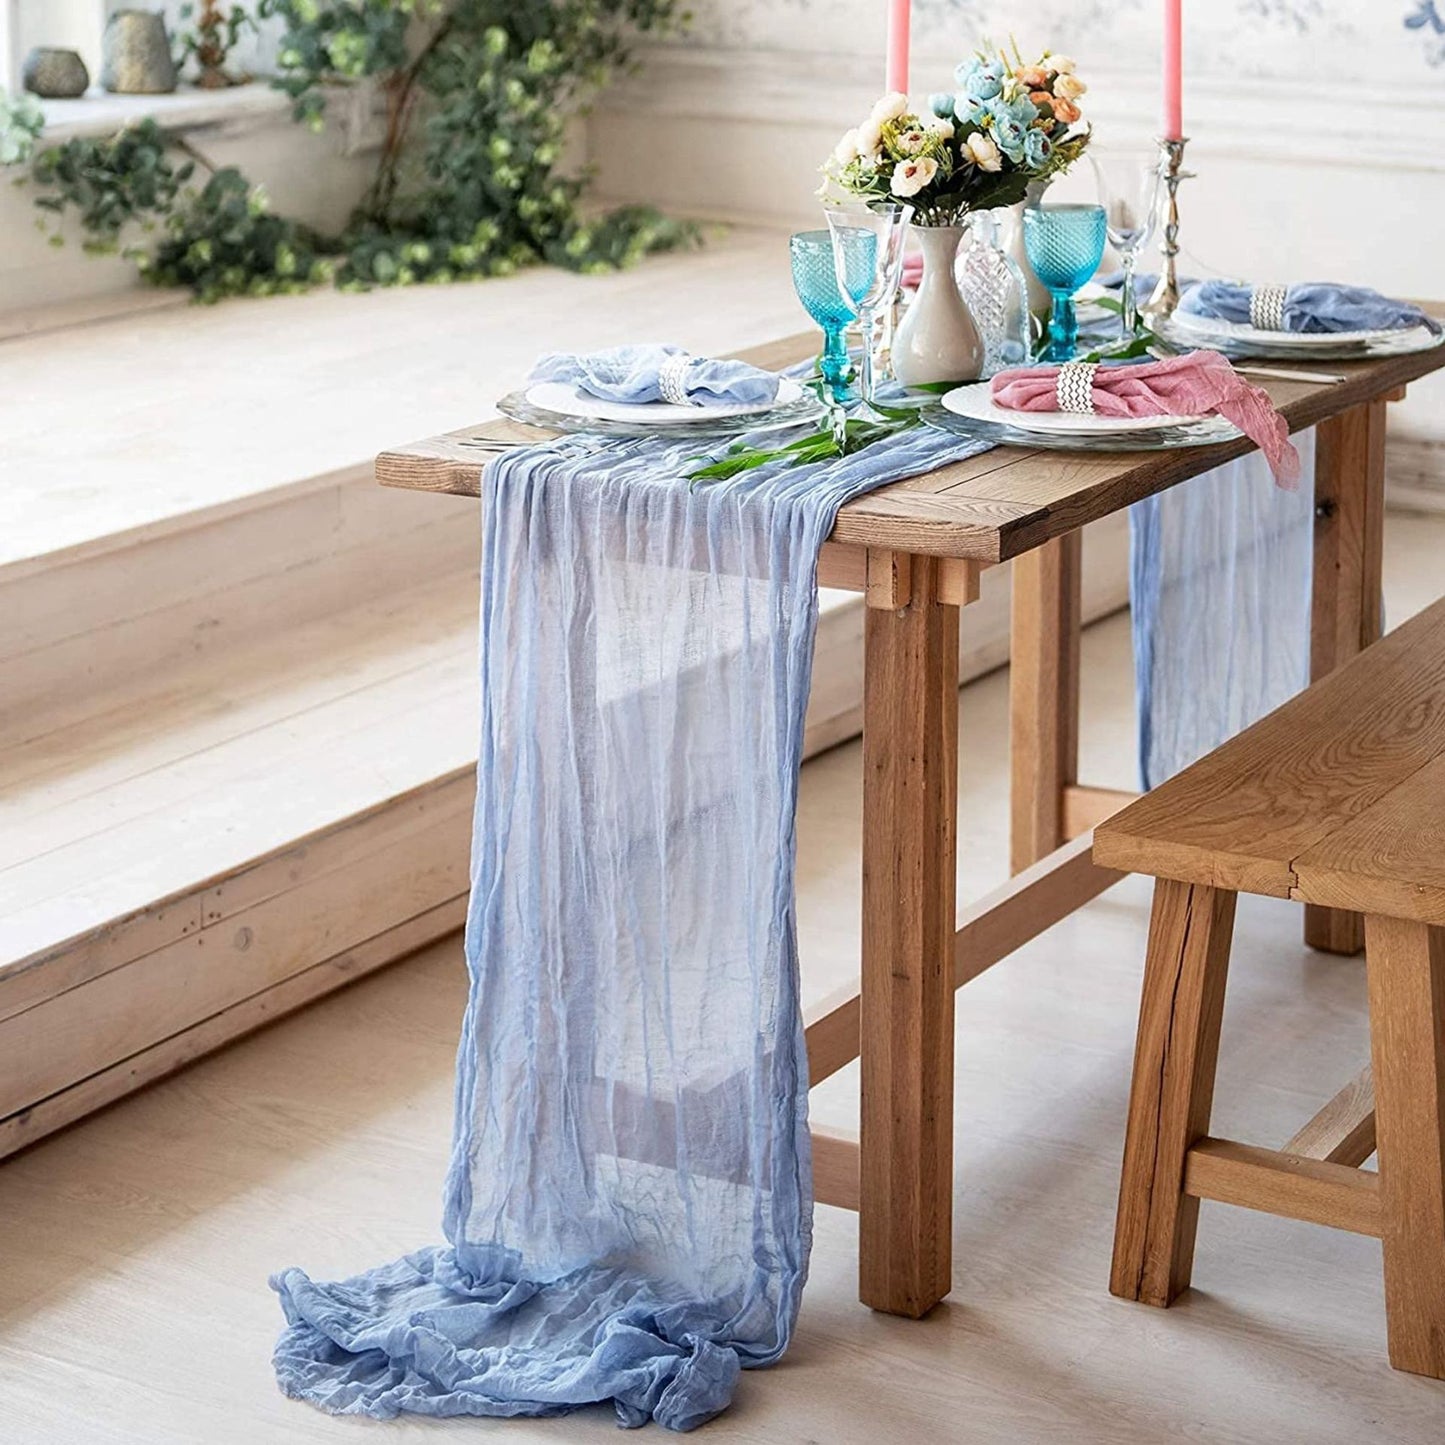 Luxury Table Runner Dinning Table Decoration Rustic Boho Wedding Party Bridal Shower Birthday cheesecloth gauze table runner